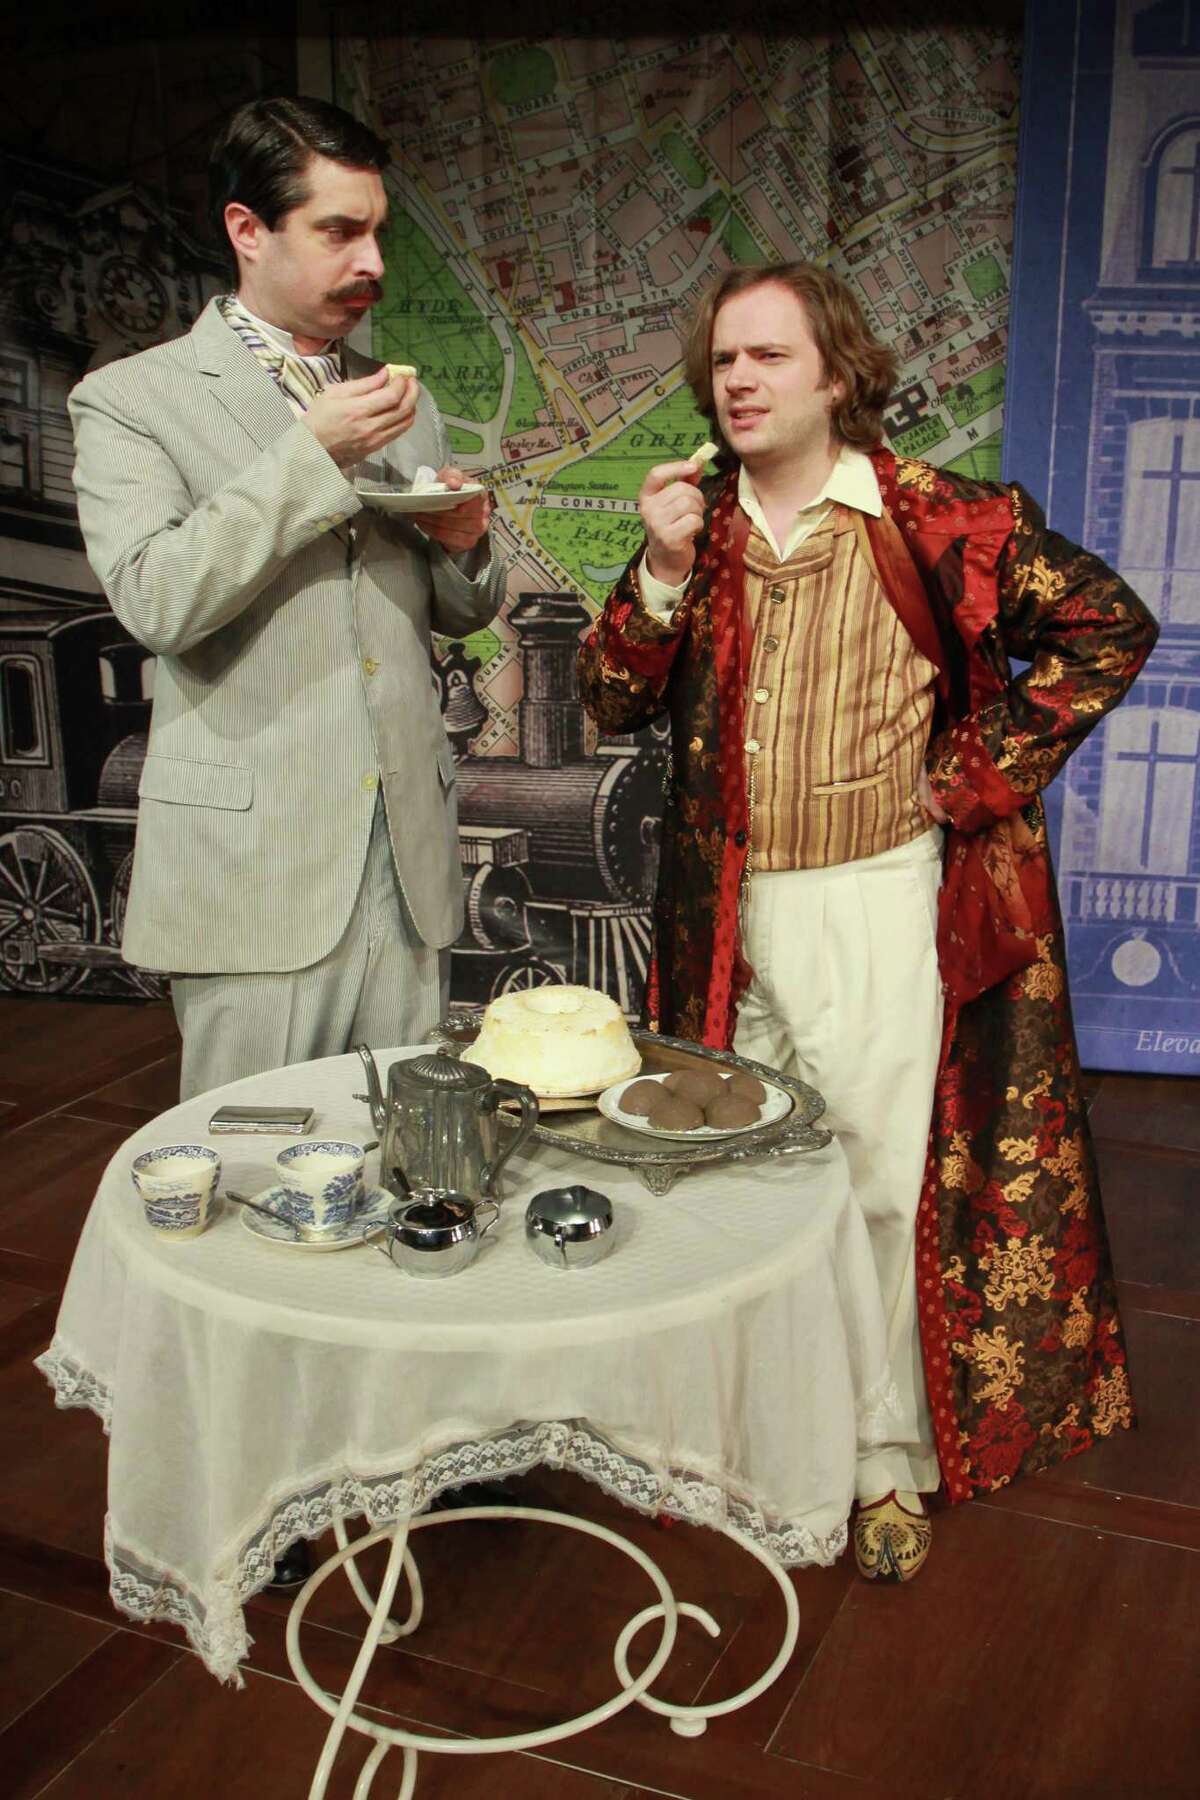 John Johnston, left, as Jack, and Matthew Keenan as Algernon, star in Classical Theatre Company's production of Oscar Wilde's classic comedy of manners, "The Importance of Being Earnest."